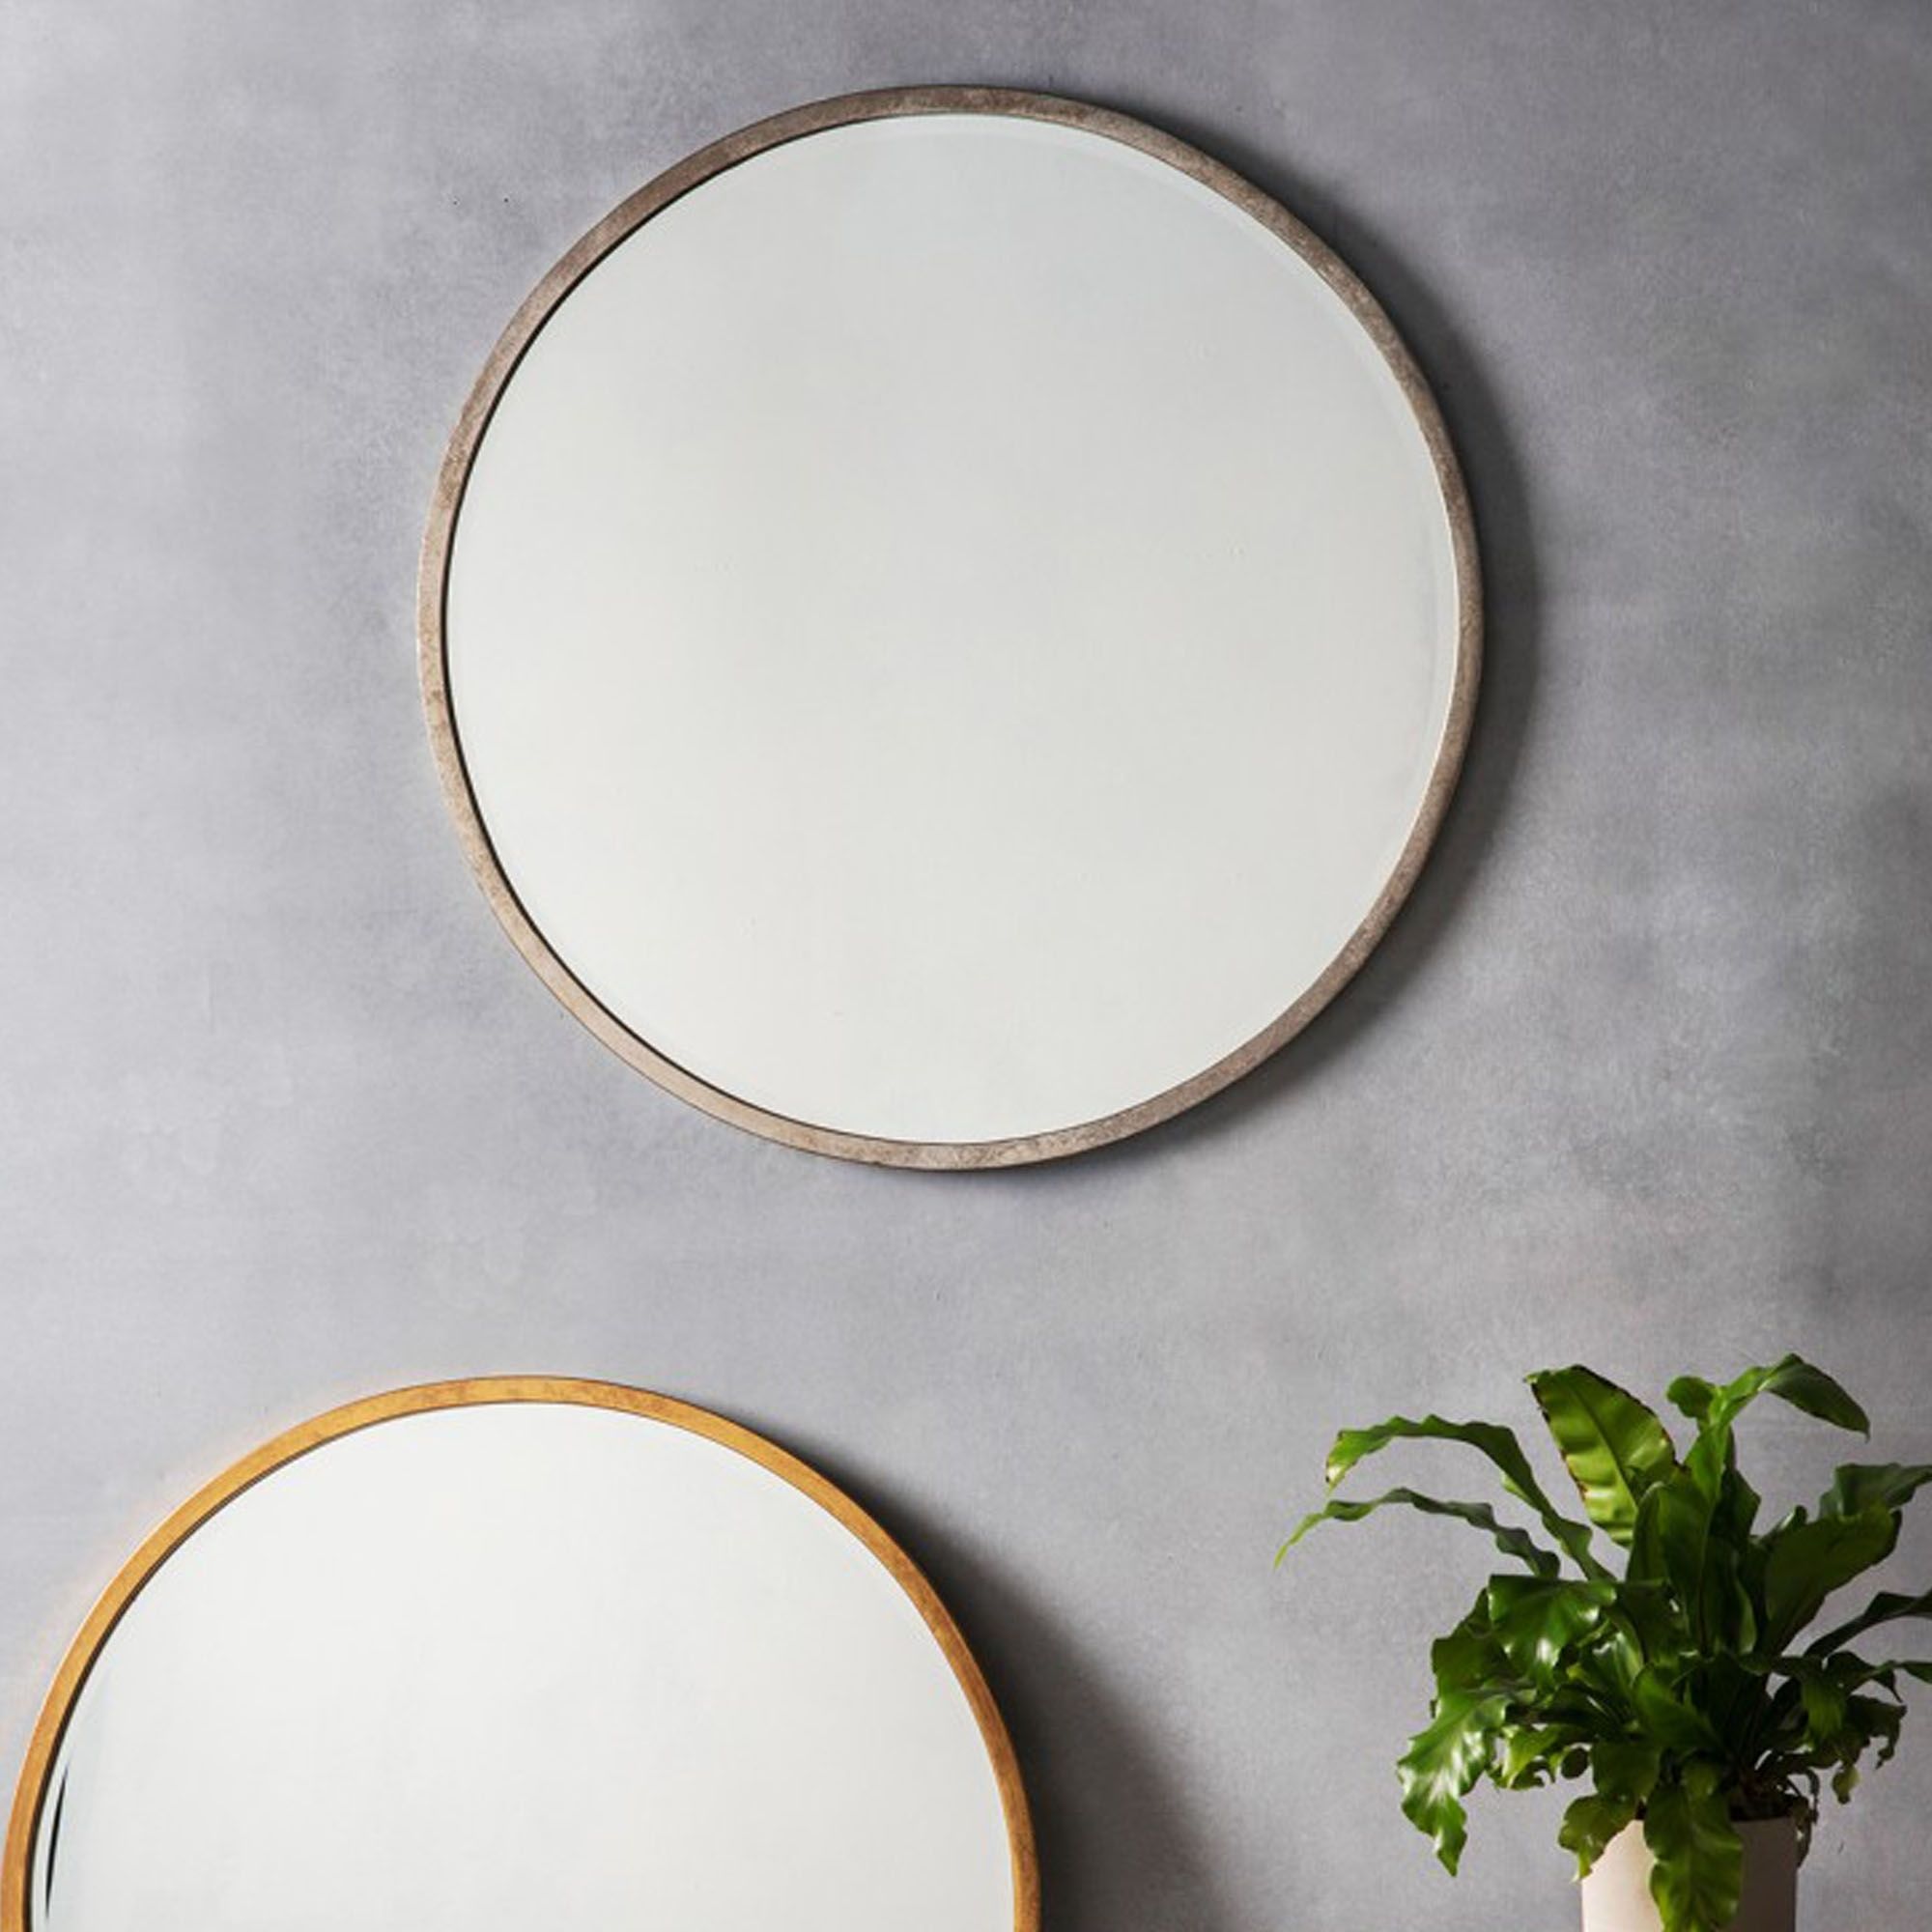 Higgins Antique Silver Round Wall Mirror |wall Mirrors| Homesdirect365 In Scalloped Round Modern Oversized Wall Mirrors (View 9 of 15)